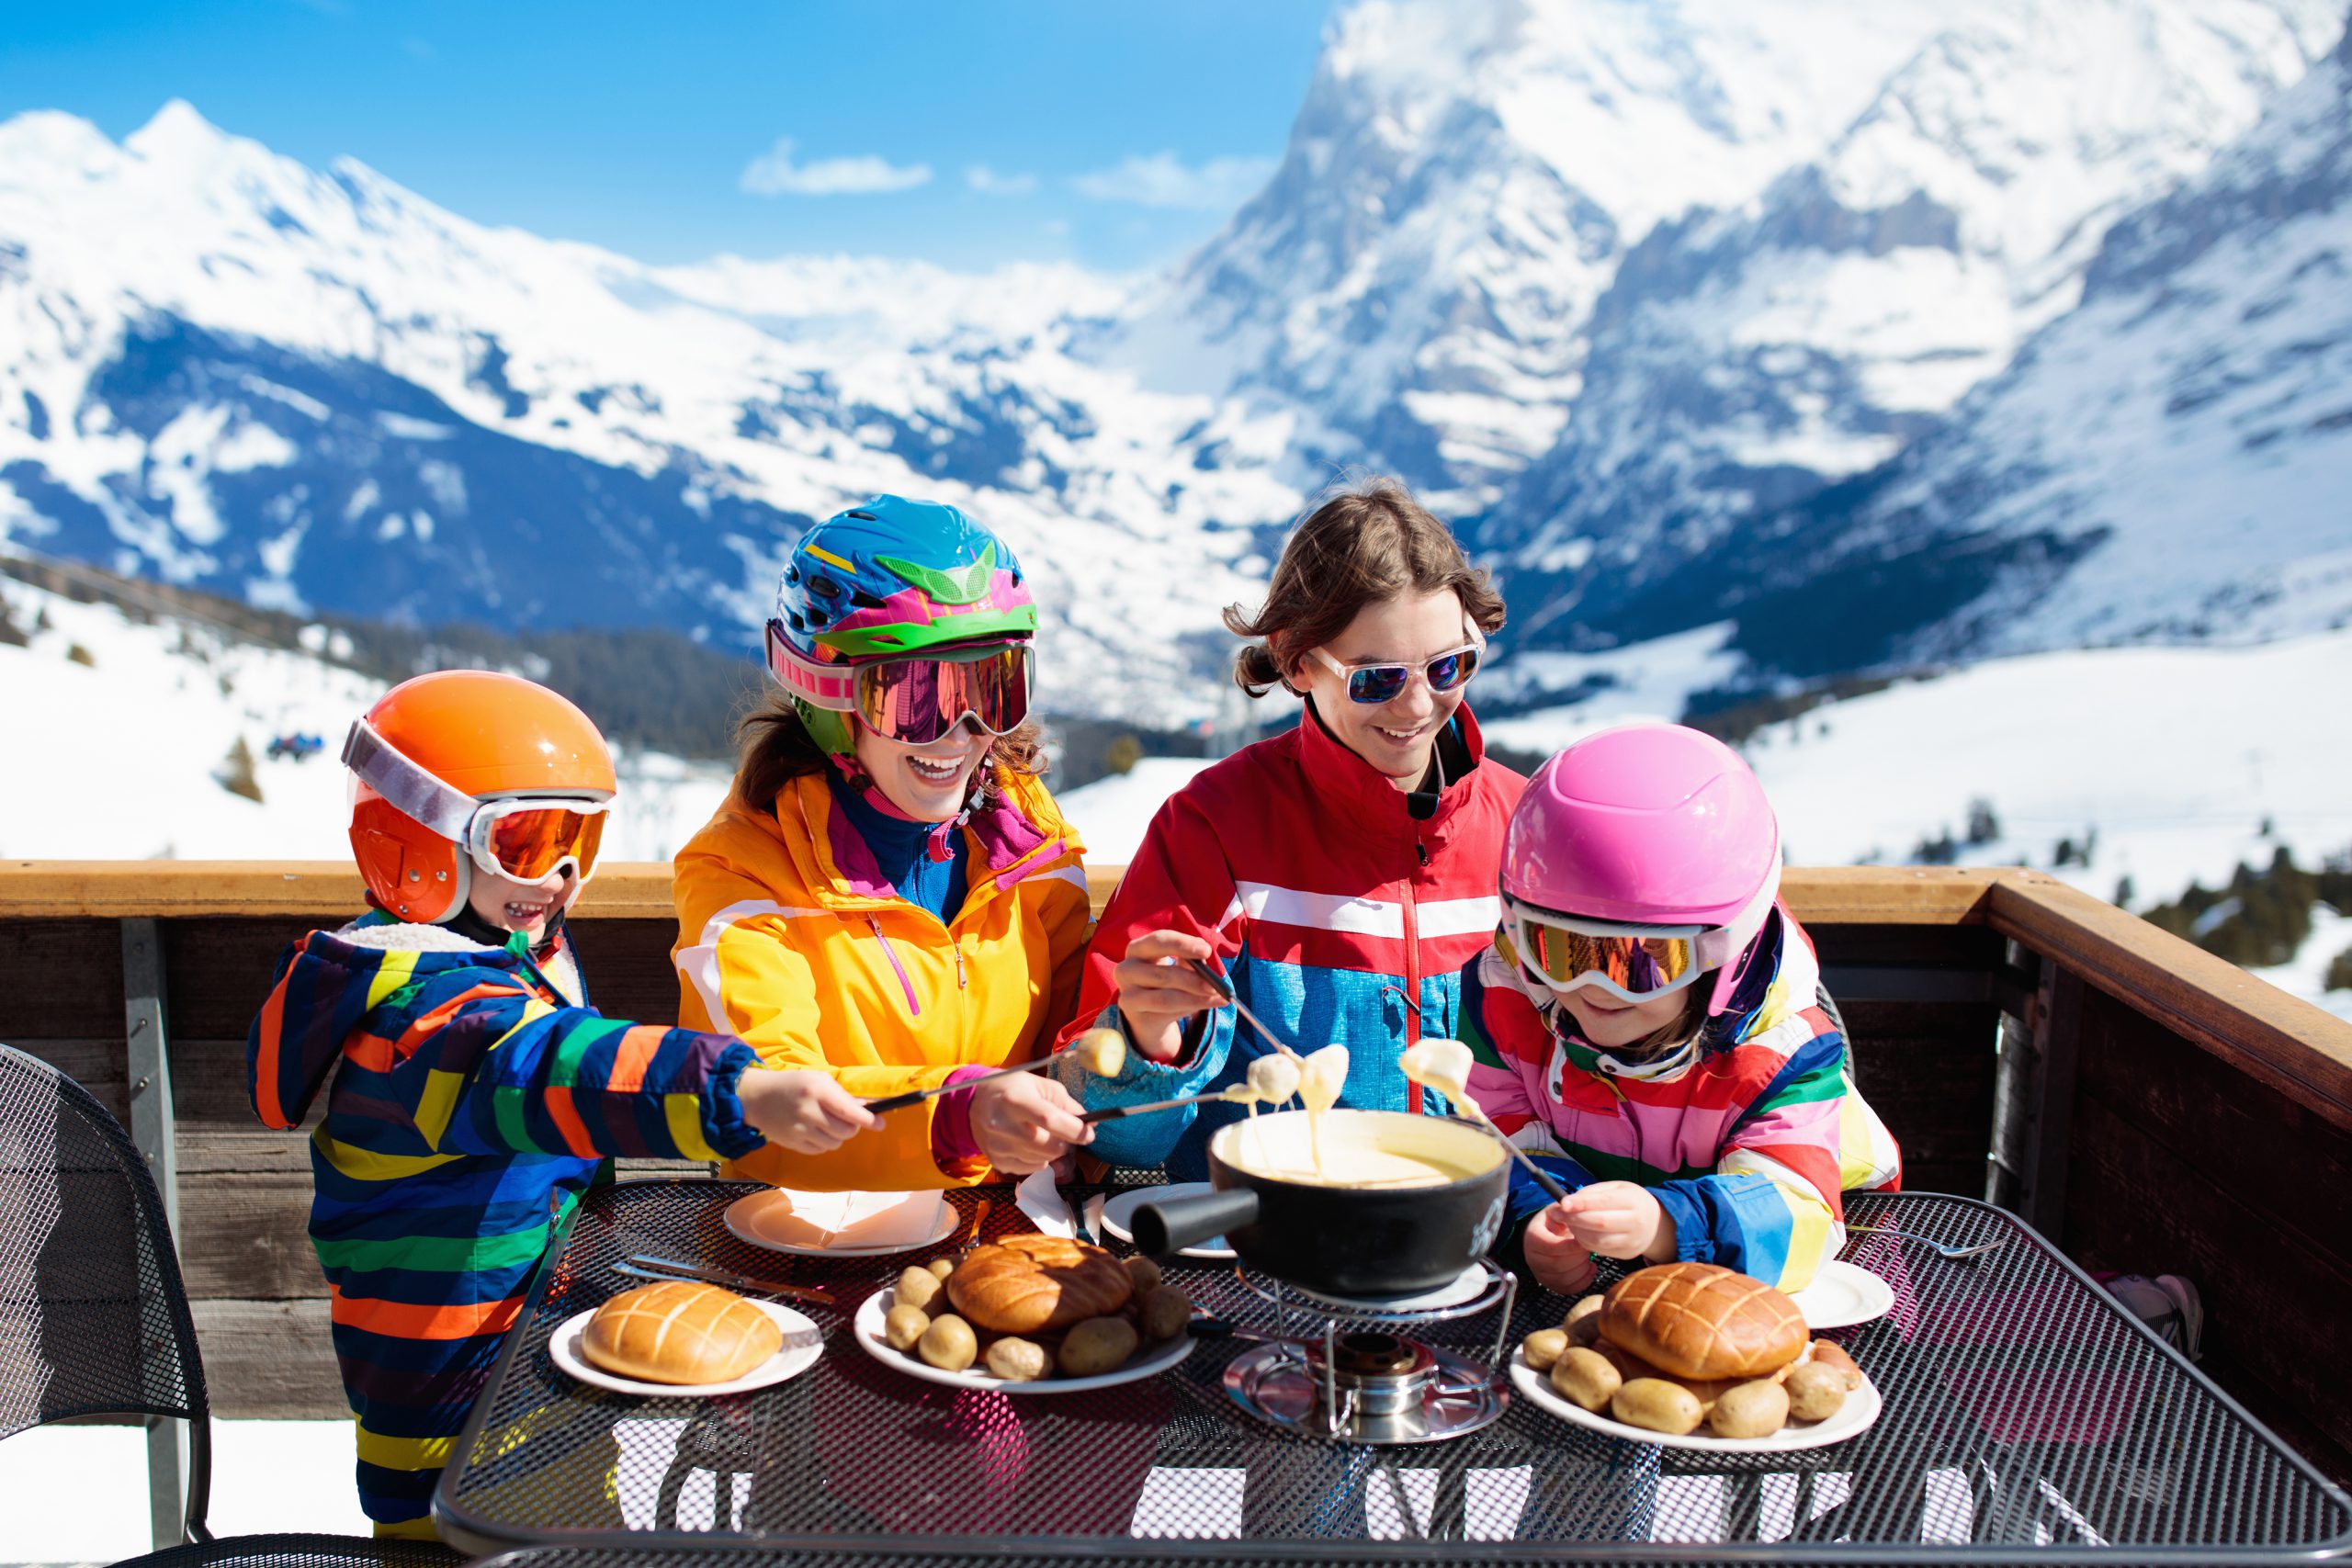 Family with children enjoying apres ski lunch with traditional Swiss raclette and cheese fondue in restaurant on top of snow covered mountain on winter or Christmas vacation. Parents and kids skiing.